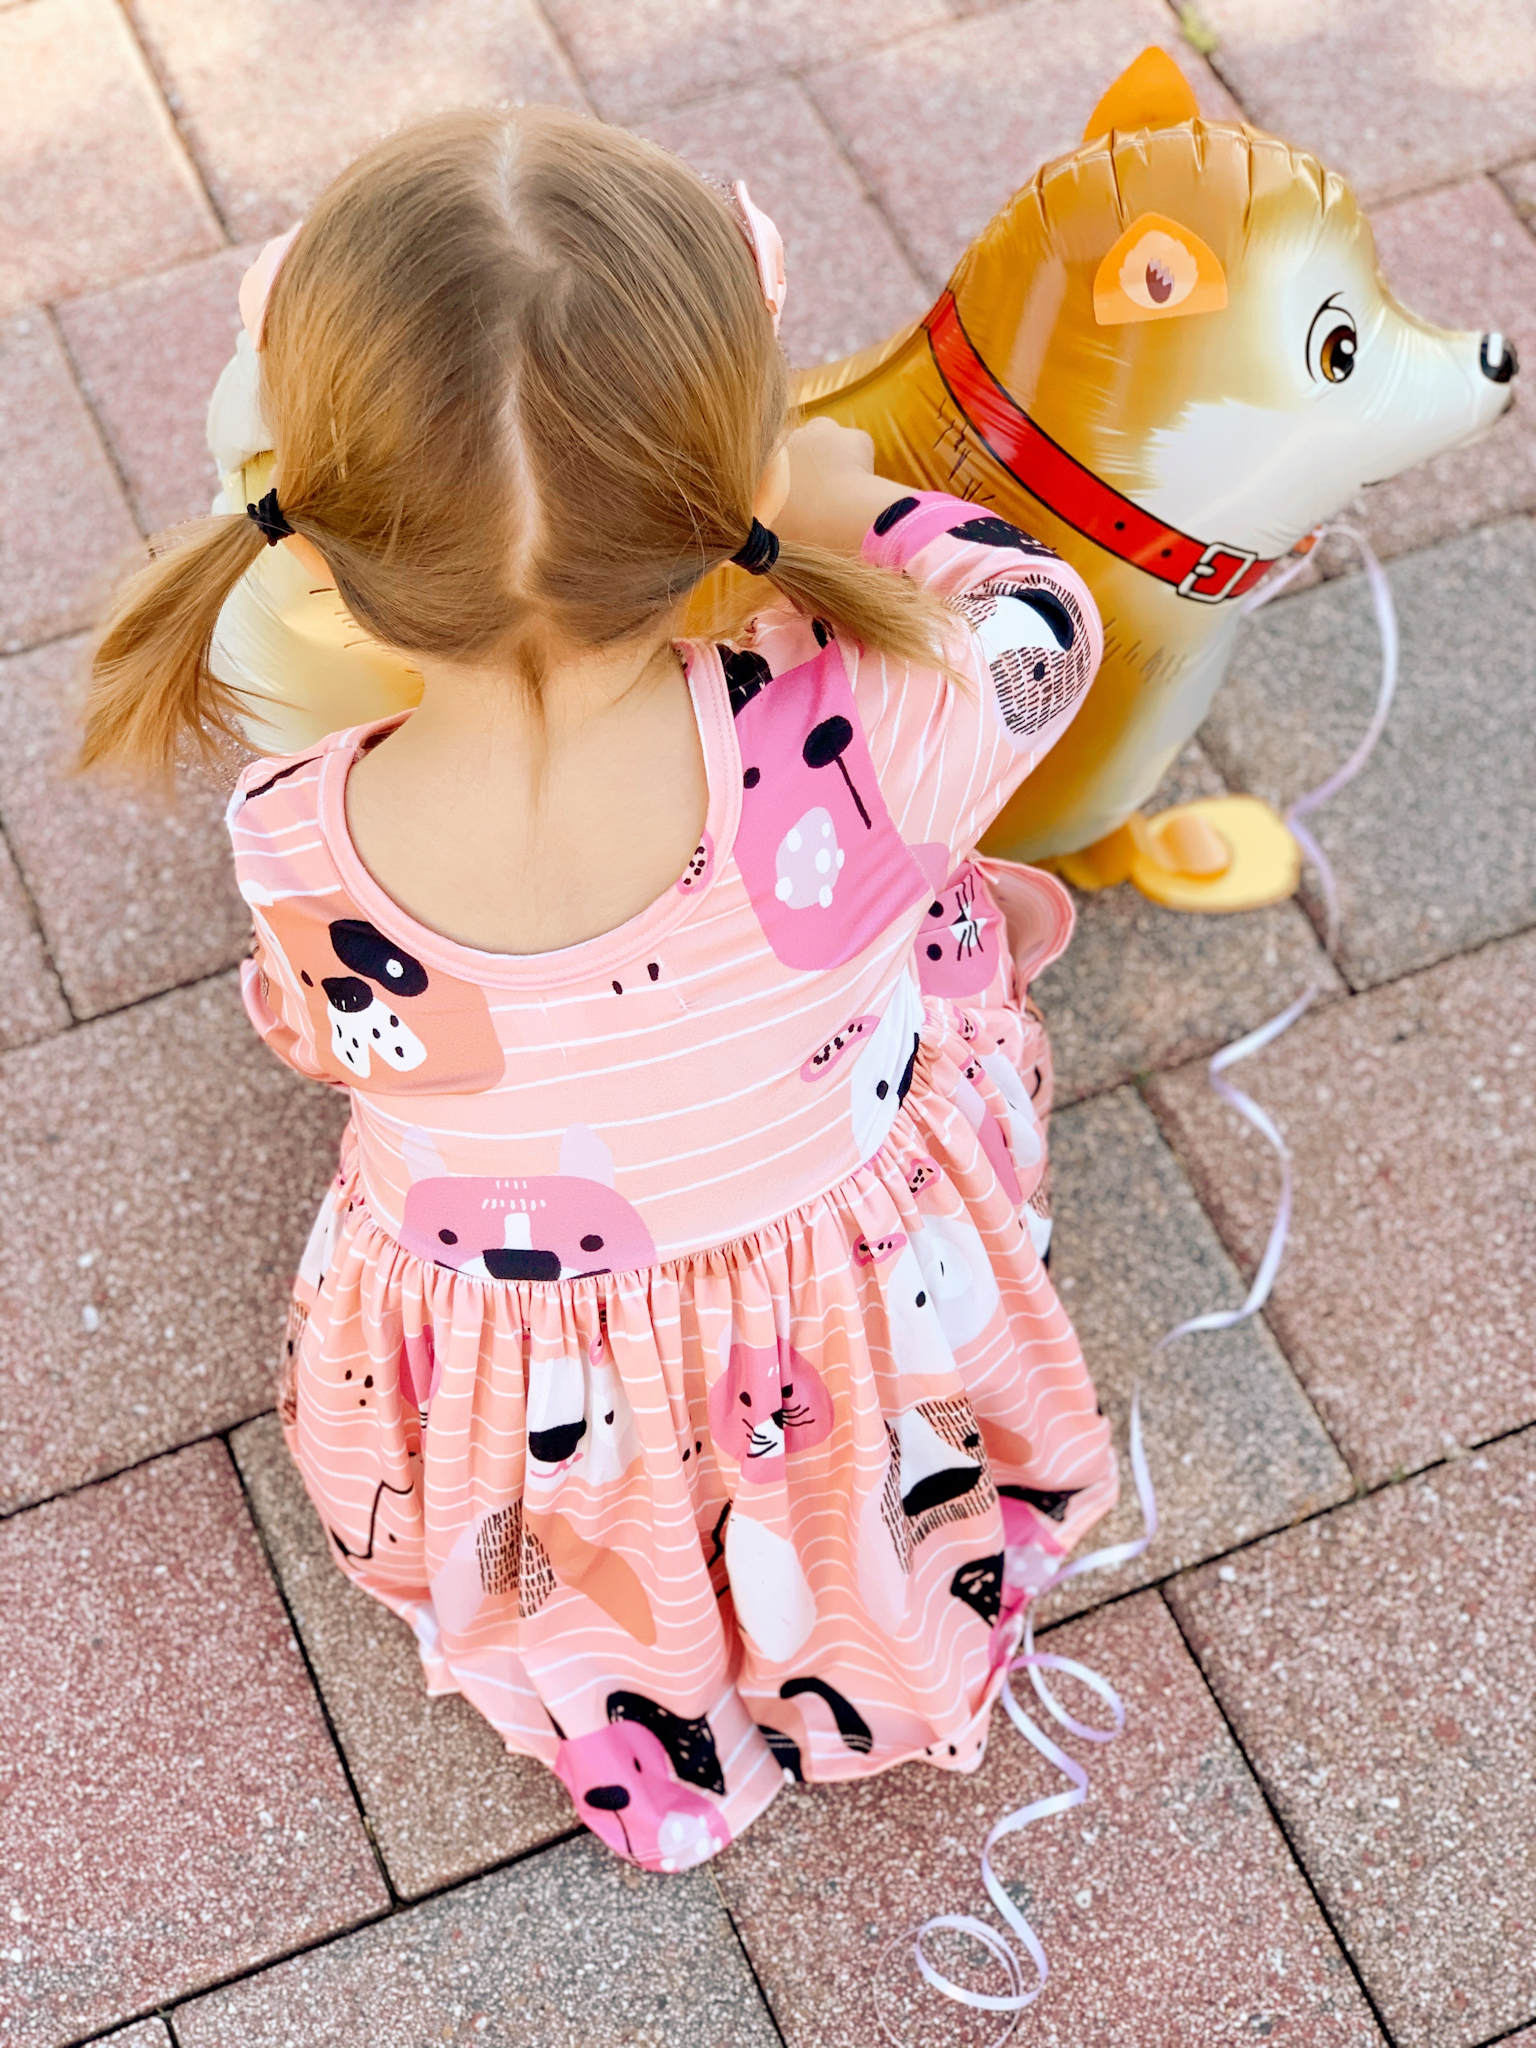 Pepper's 2nd Birthday "Puppy Paw-ty!" Creative party ideas via thinkingcloset.com - Doggy days pocket twirl dress with walking dog balloon for the cutest driveway photo shoot pre-party!